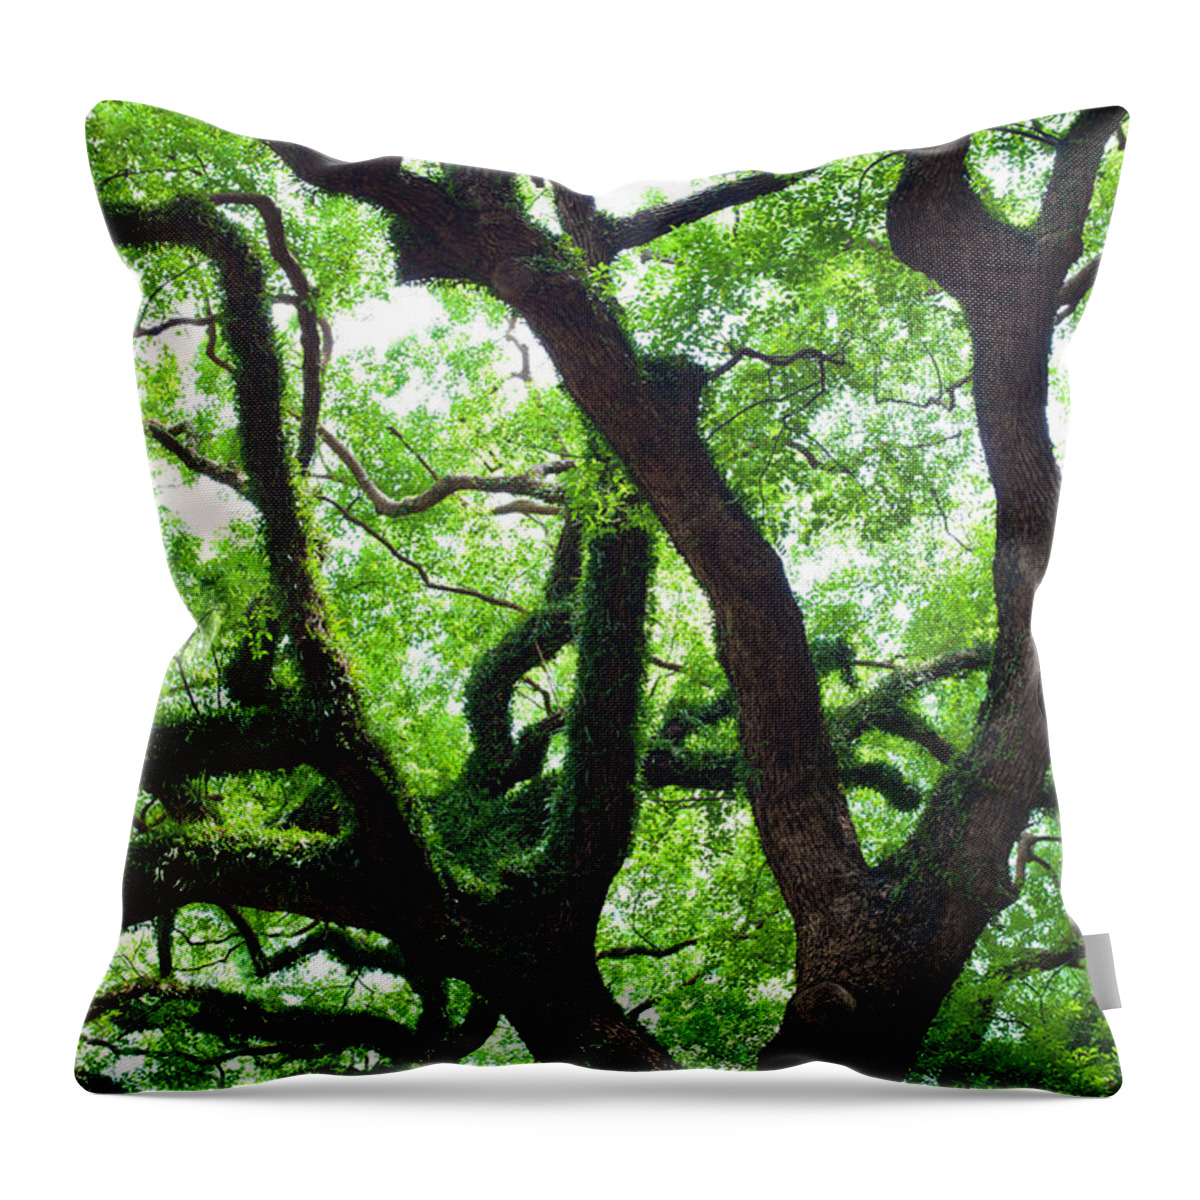 Environmental Conservation Throw Pillow featuring the photograph Dragon Tree Hongkong by 4x-image